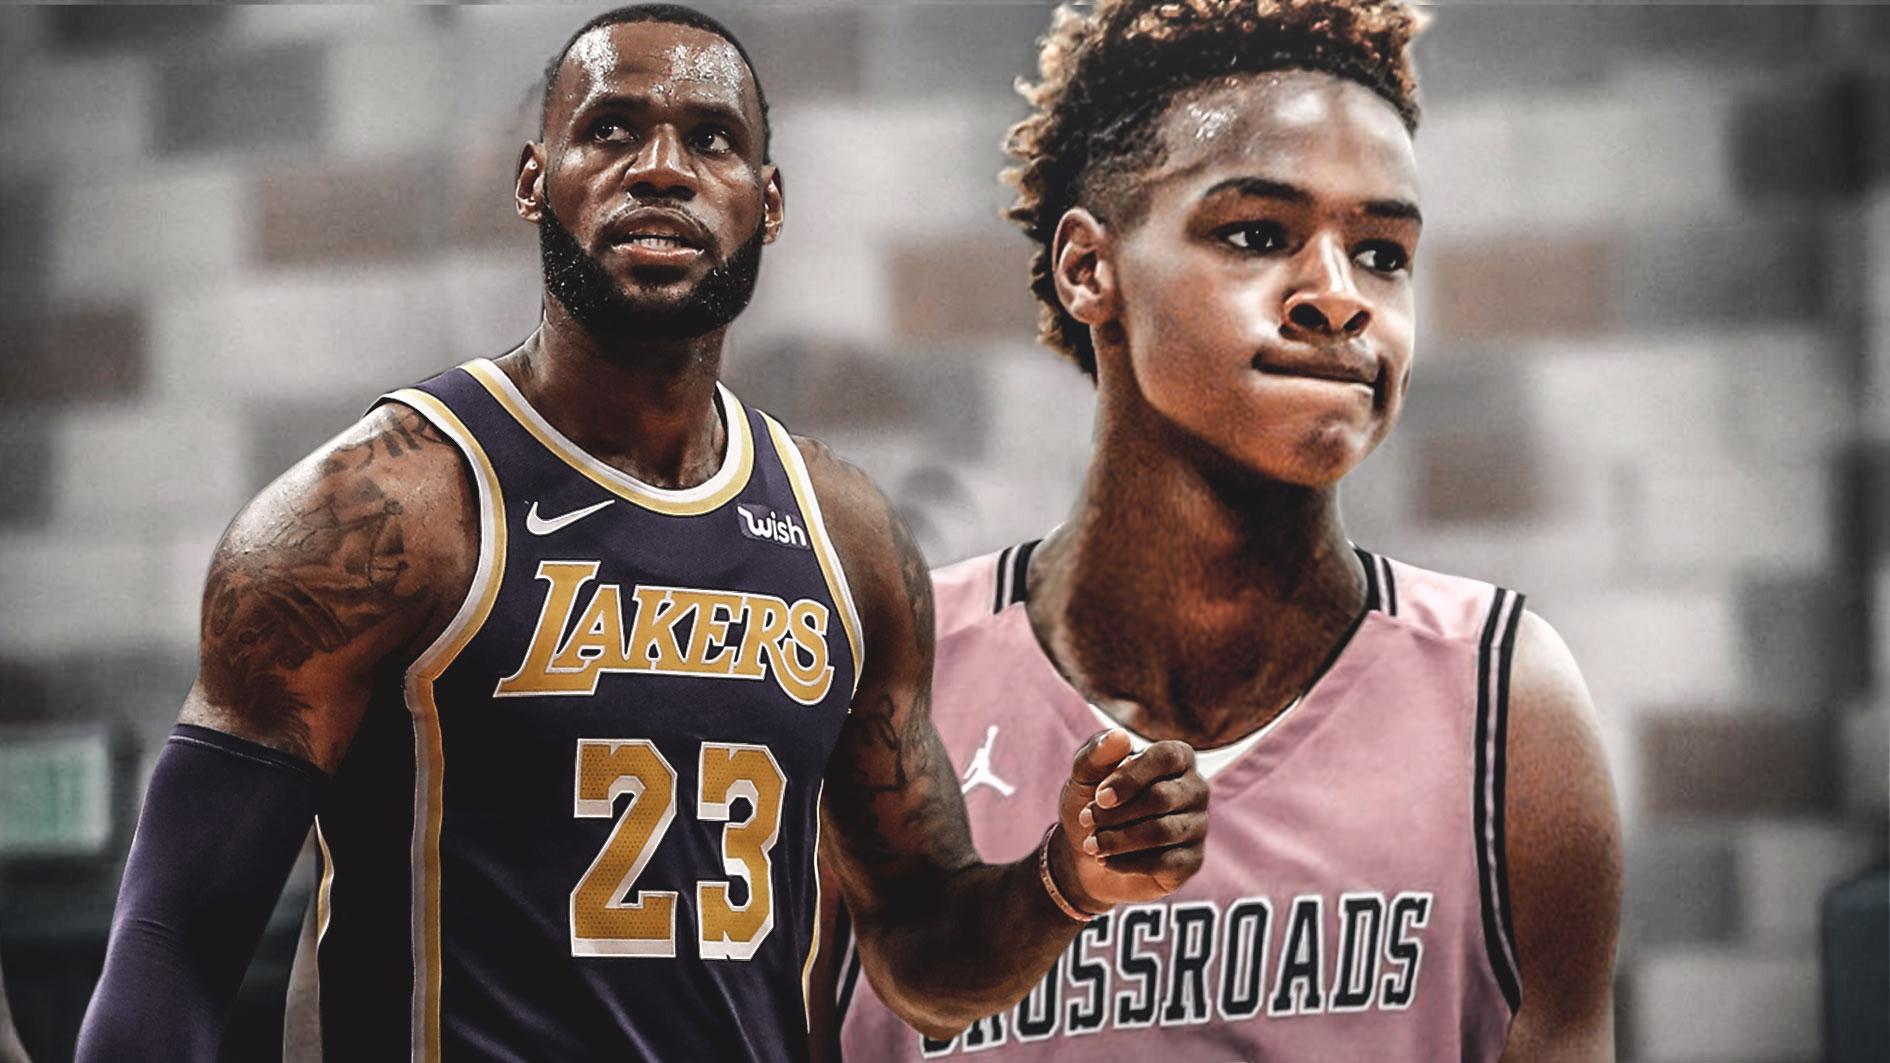 Lakers news: LeBron James reacts to son choosing to wear his number